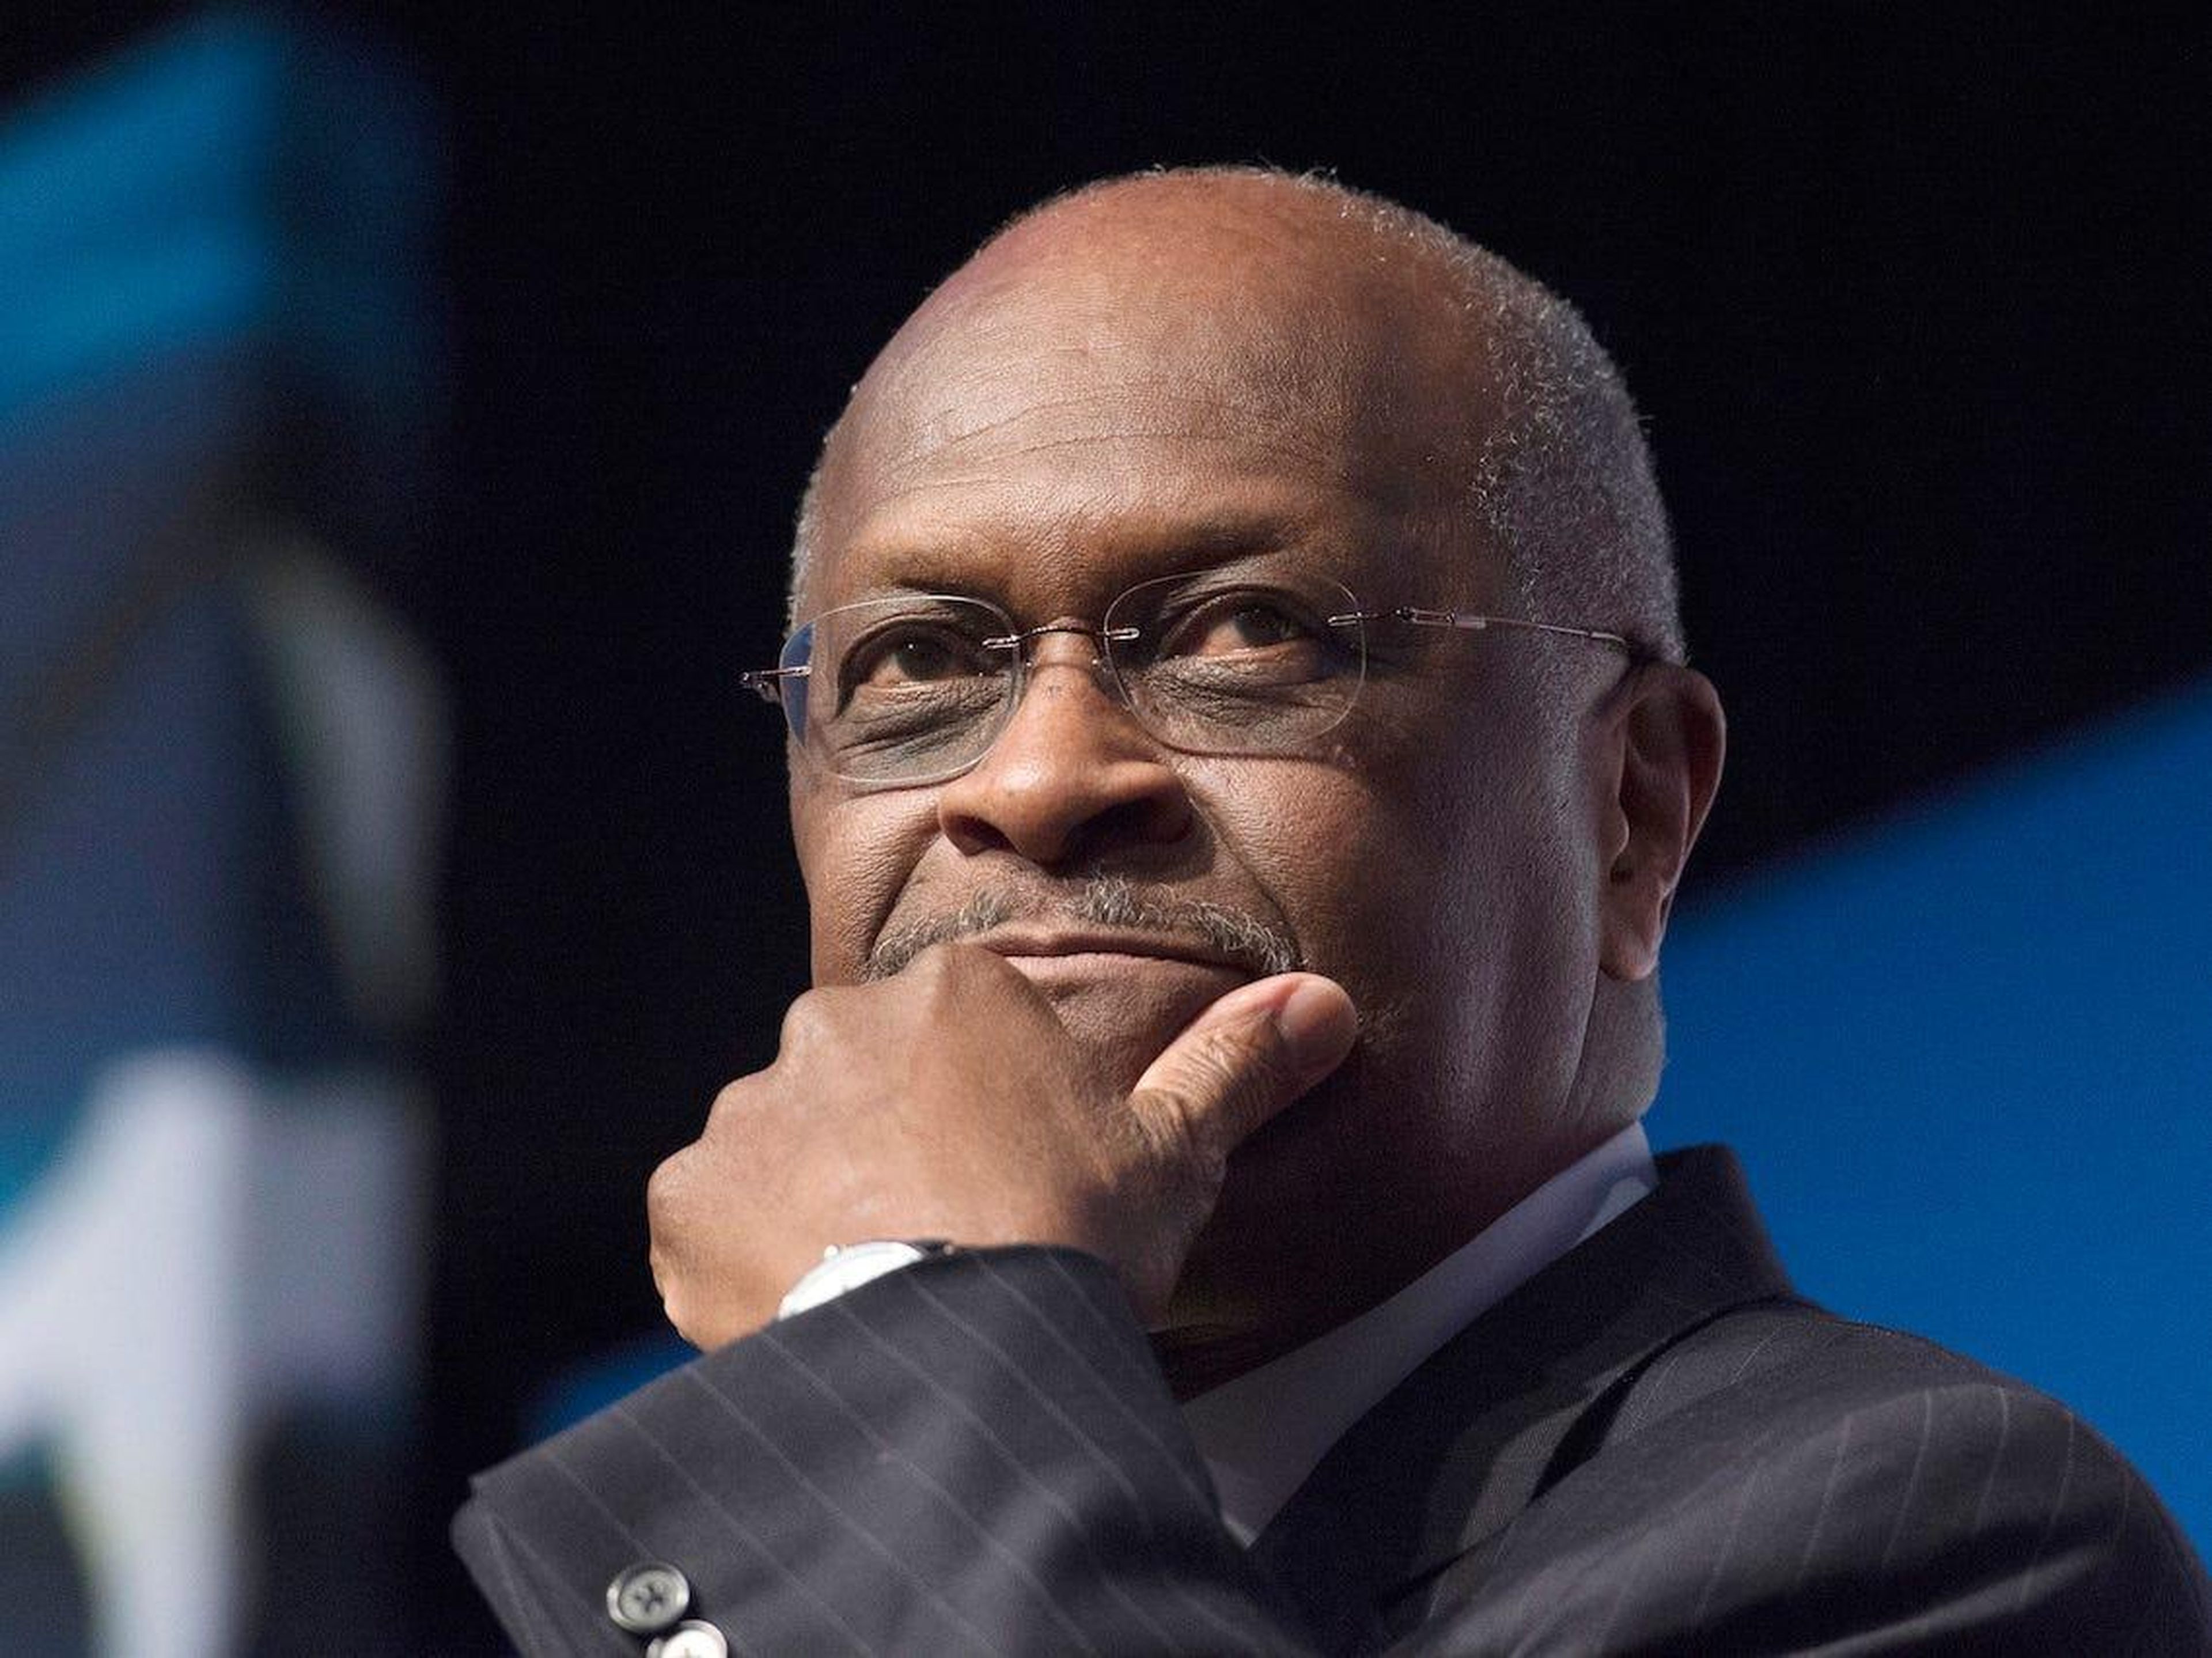 Herman Cain, CEO, The New Voice, speaks during Faith and Freedom Coalition's Road to Majority event in Washington. Molly Riley/AP Images